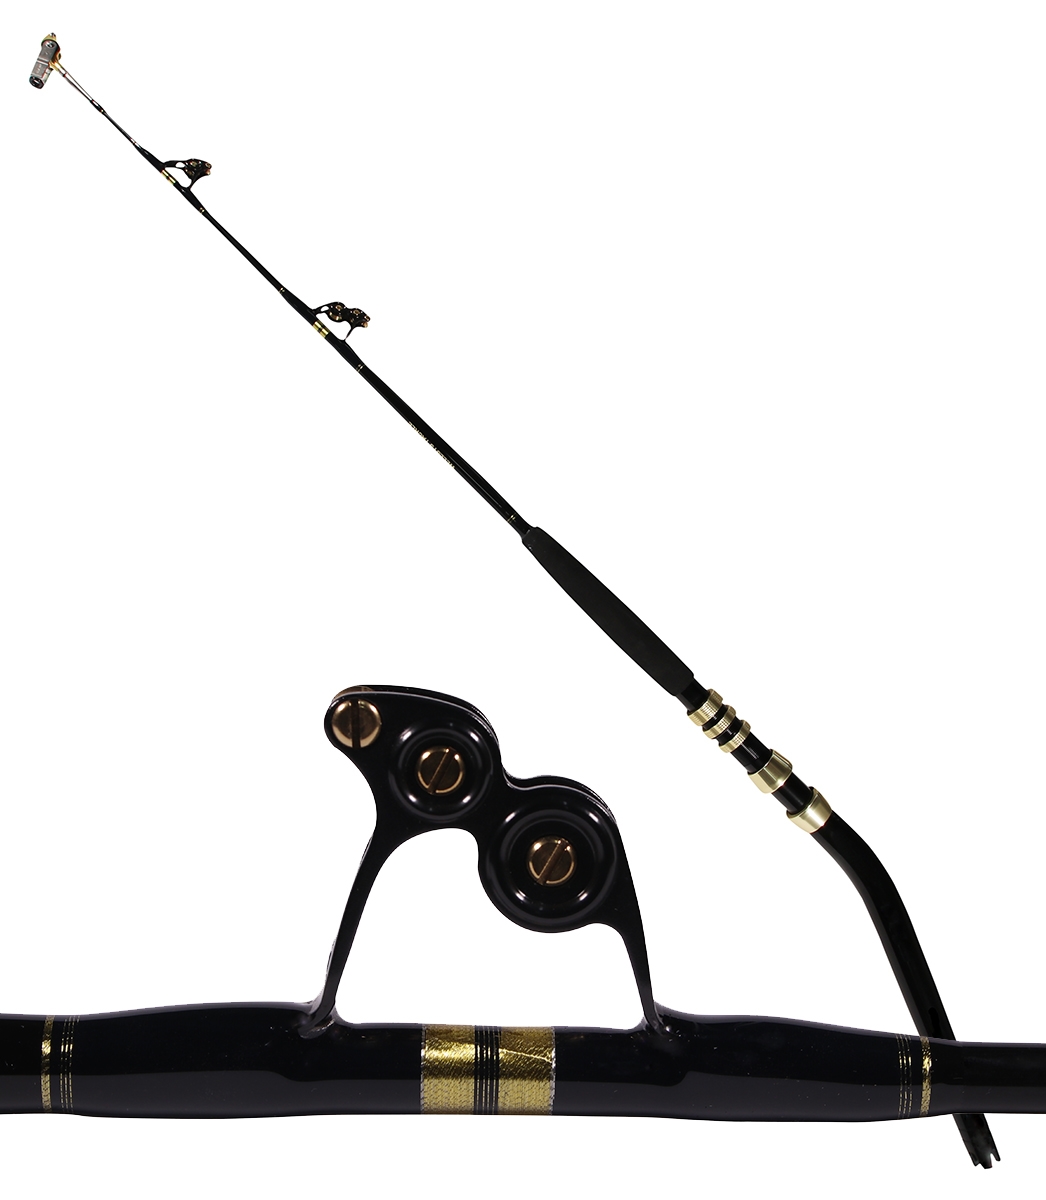 Gary Howard Game Fishing Rods - TEASER or DREDGE TOWING